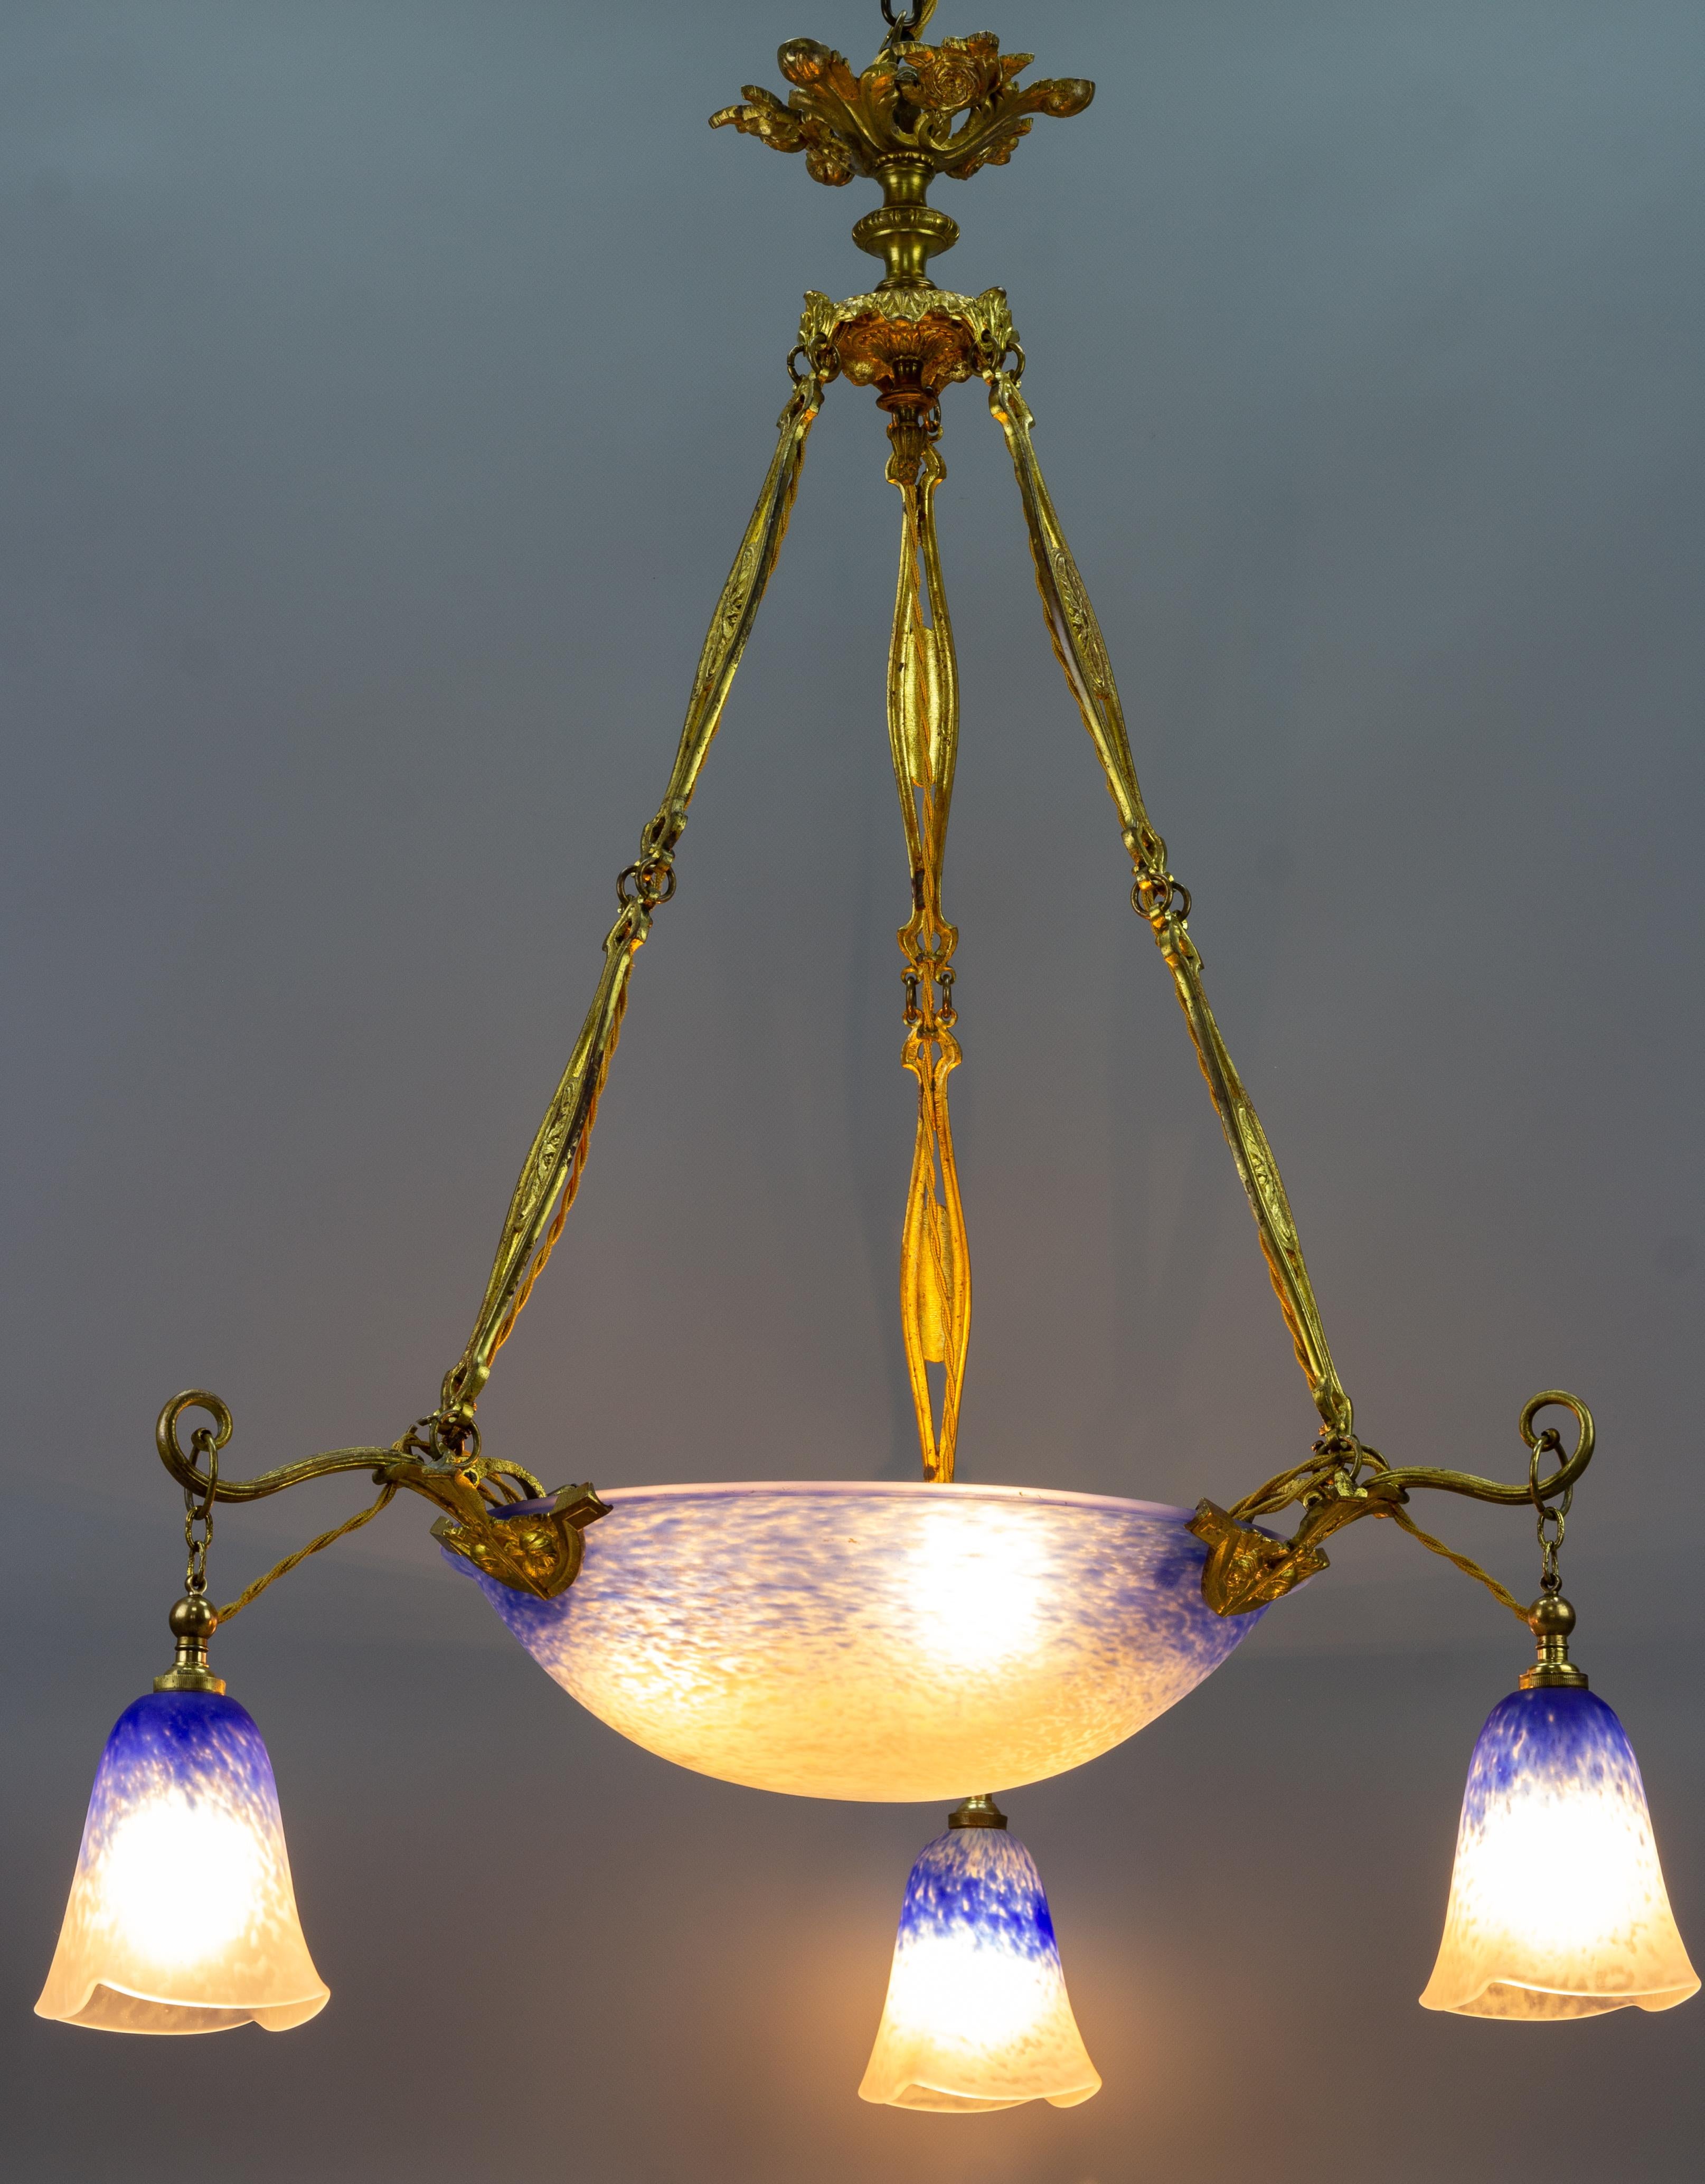 This adorable French Art Nouveau period pendant chandelier features a mottled “Pâte de Verre” art glass shades in blue and white color, signed ”Schneider” by Charles Schneider, hung at an ornate, impressive bronze fixture with roses and foliate